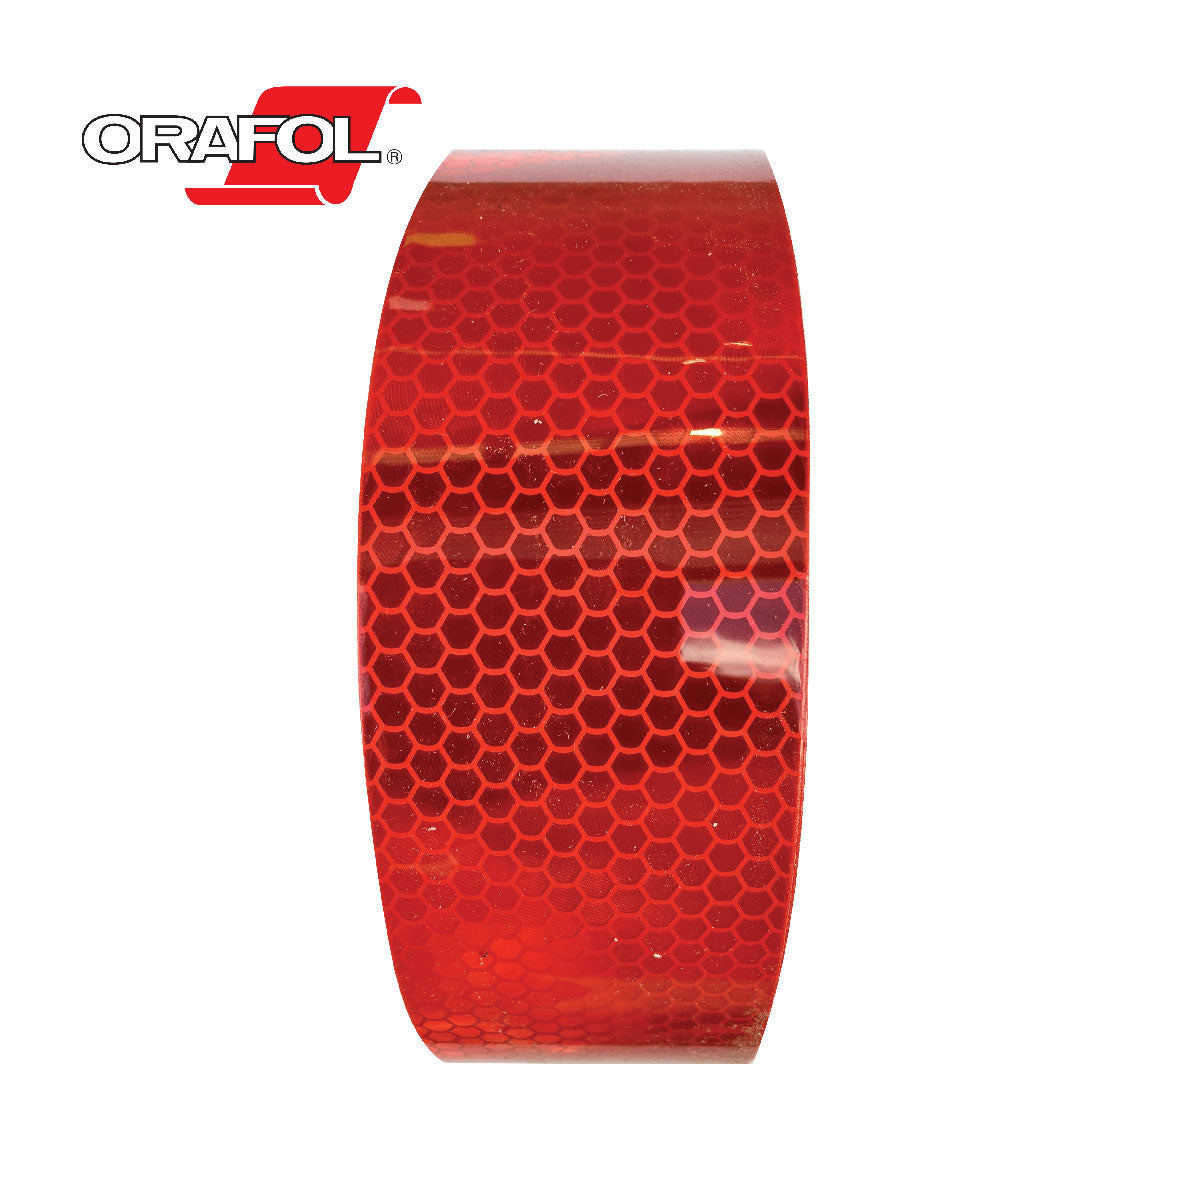 Red - Reflective Vehicle Marking Tape